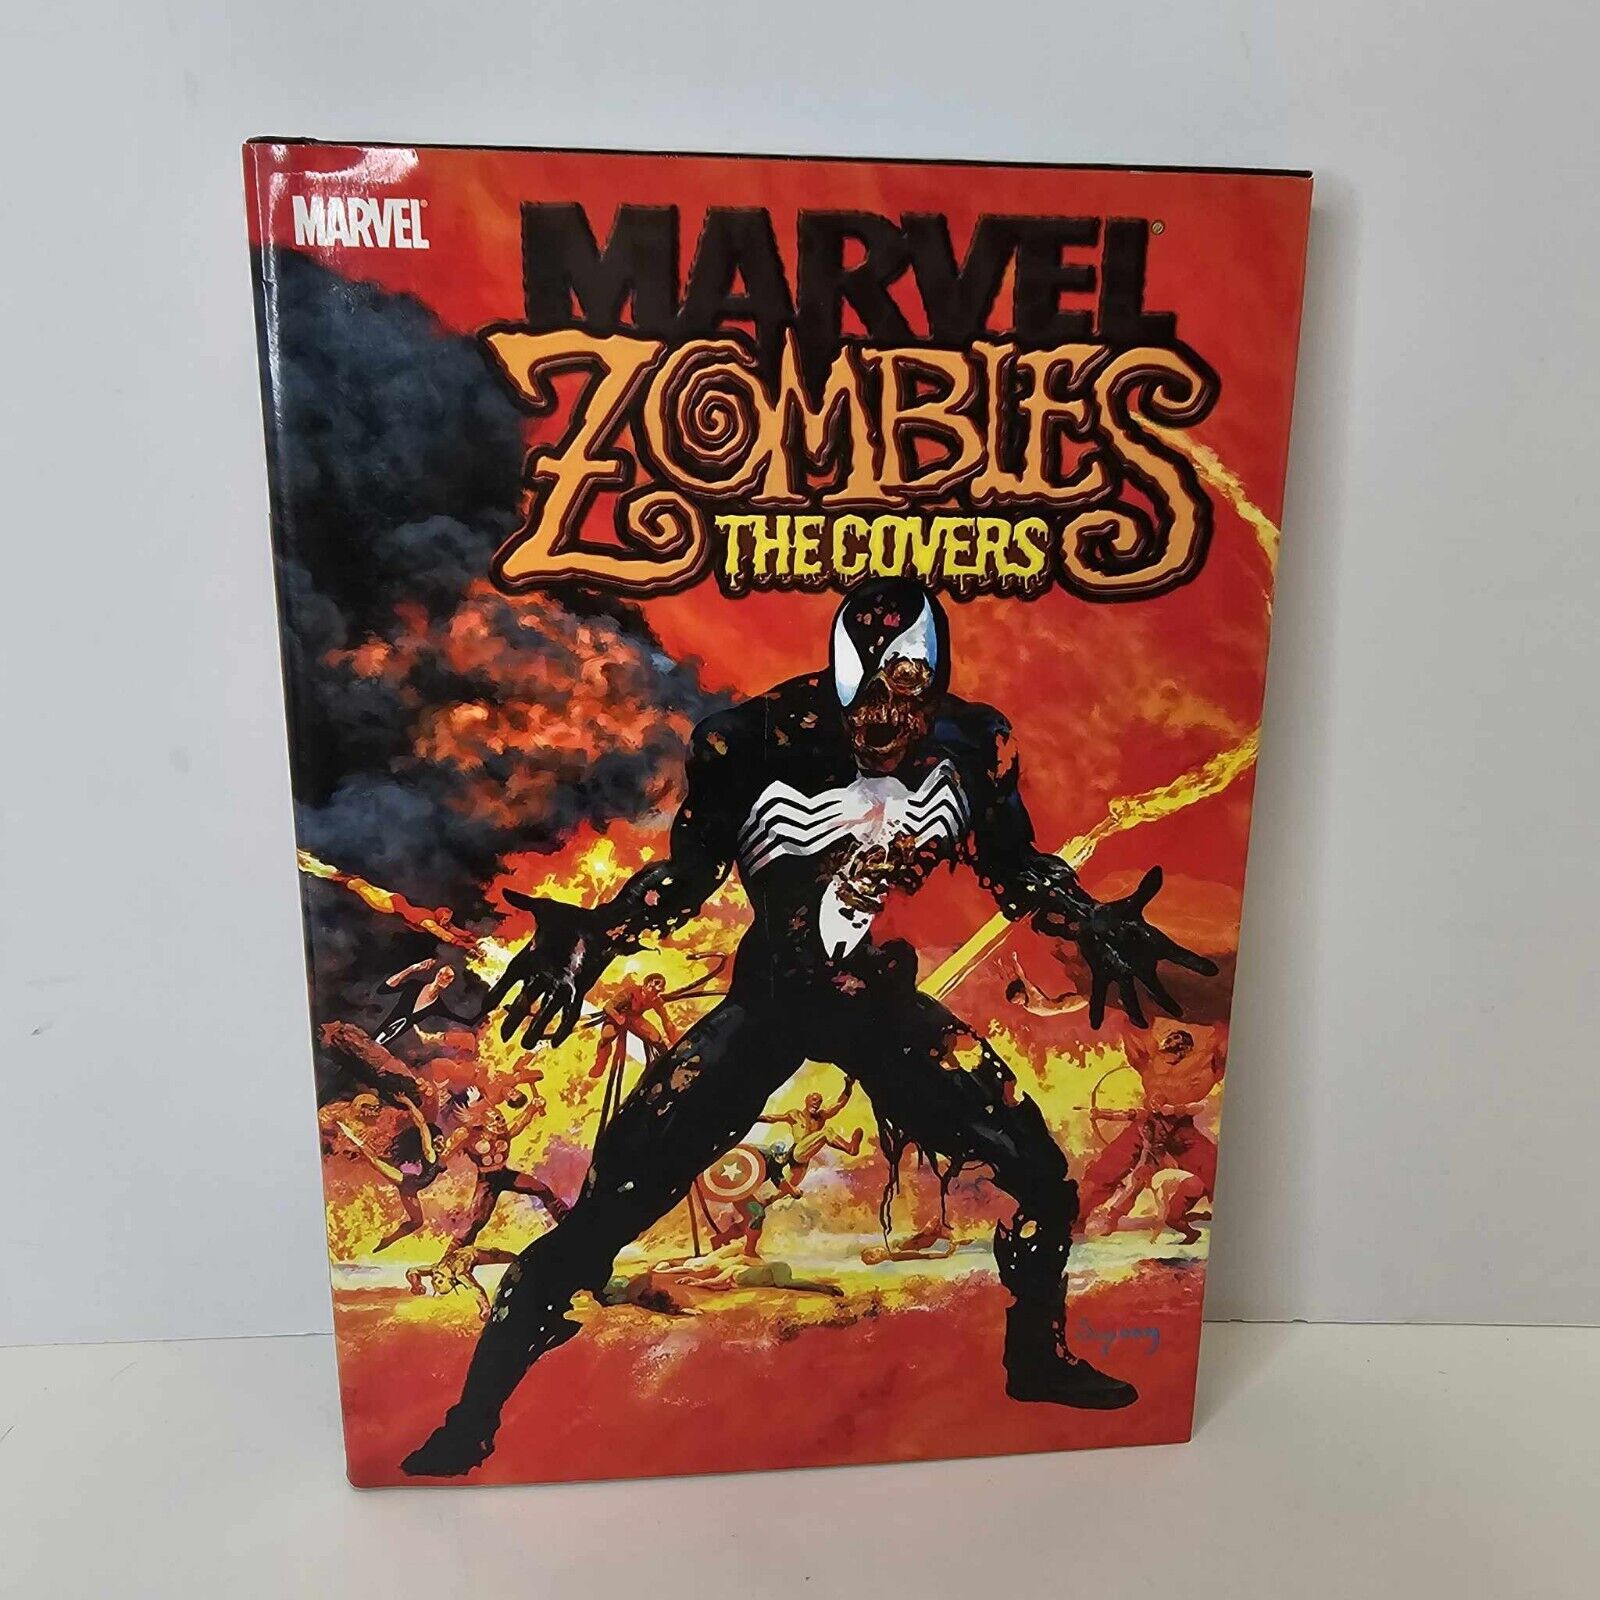 Marvel Zombies: The Covers by Arthur Suydam Rare Hardcover G1